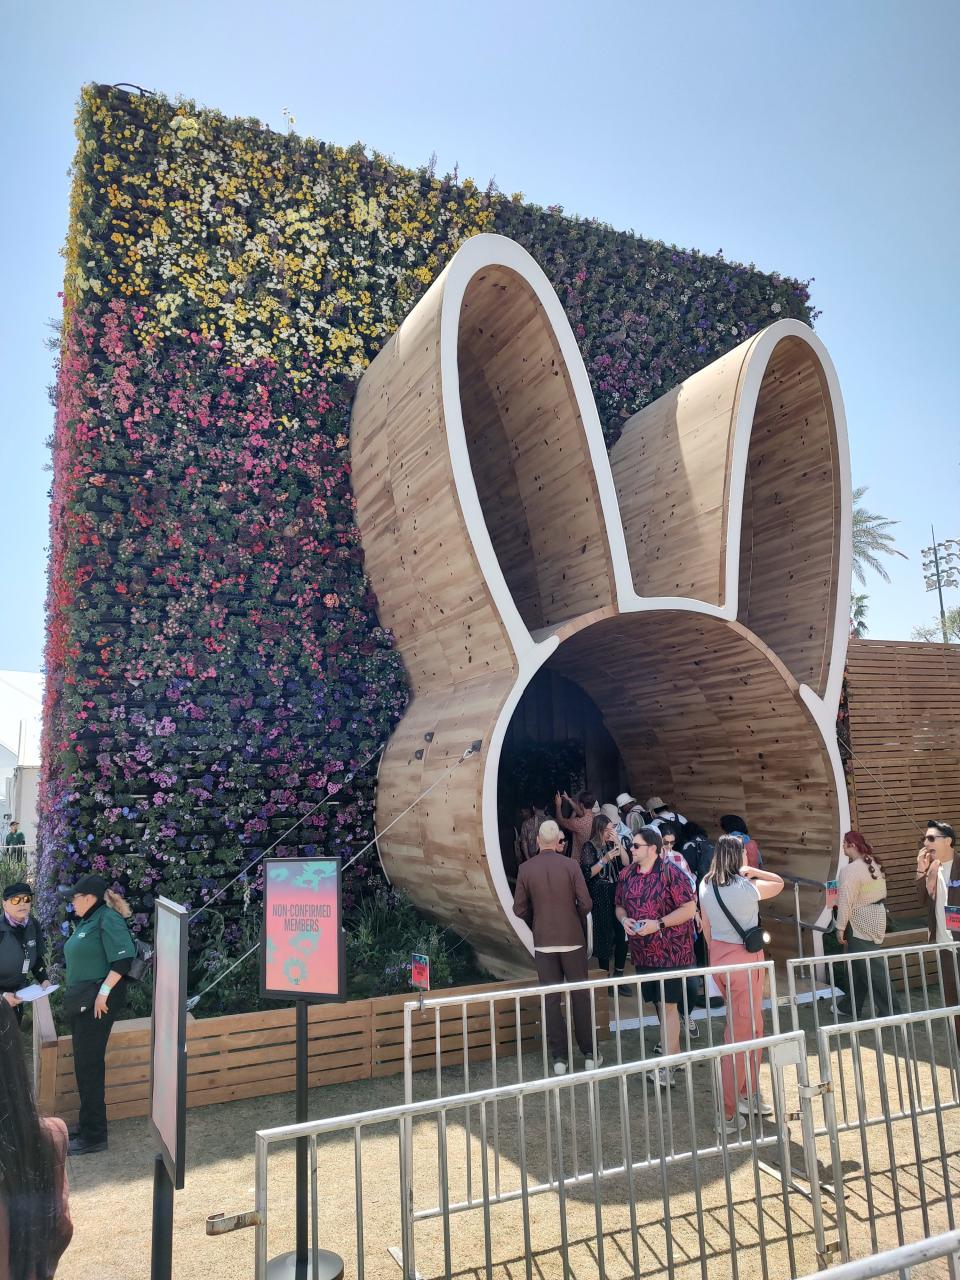 The Adidas flower cube structure at the Coachella Valley Music and Arts Festival is sure to be a hit with Instagram hounds. The bunny-ears-shaped entrance is a nod to Friday headliner Bad Bunny.